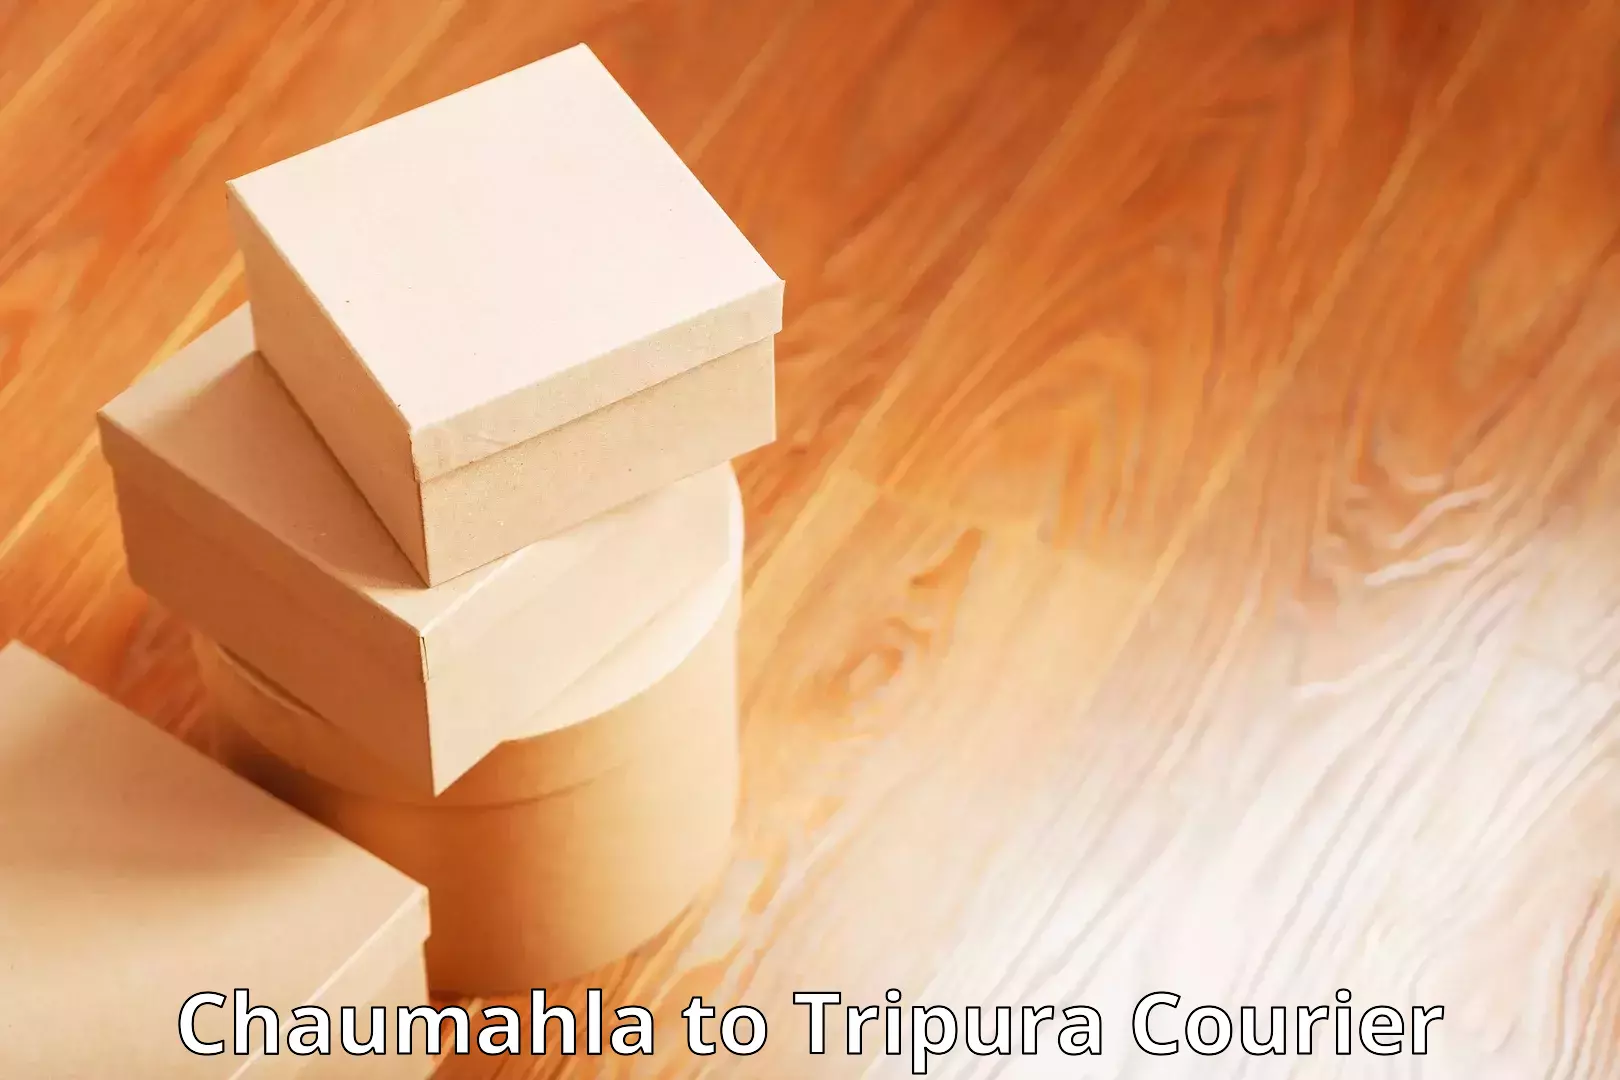 State-of-the-art courier technology Chaumahla to Tripura